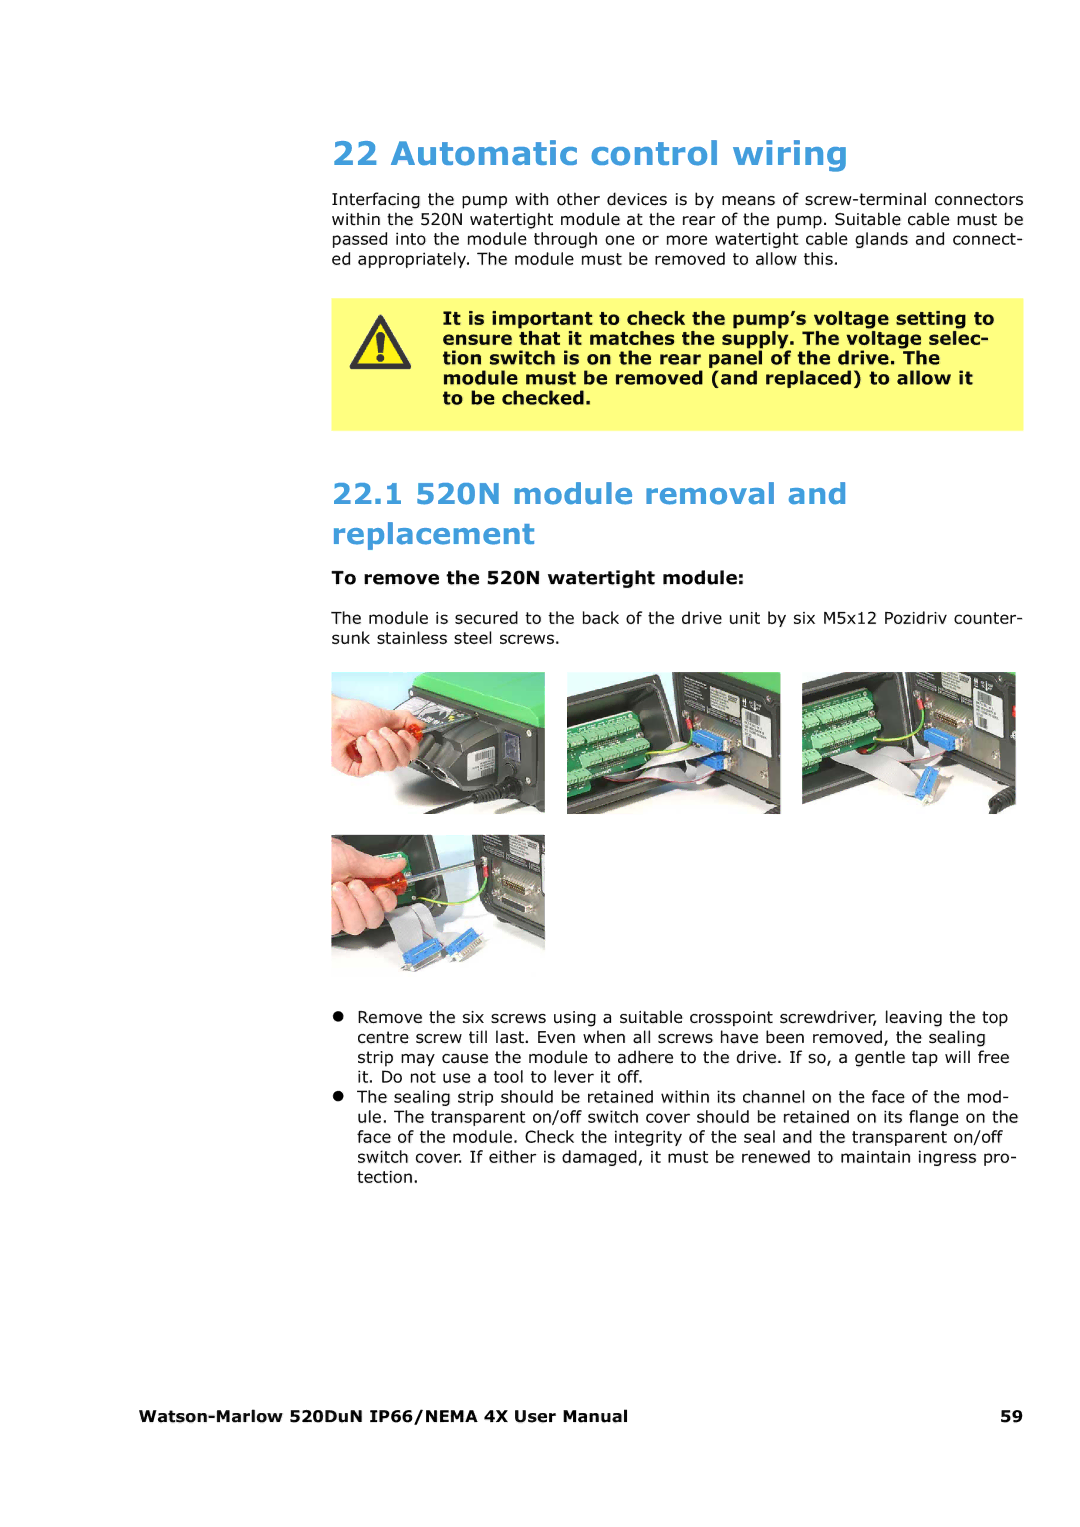 Watson & Sons 520DUN user manual Automatic control wiring, 22.1 520N module removal and replacement 